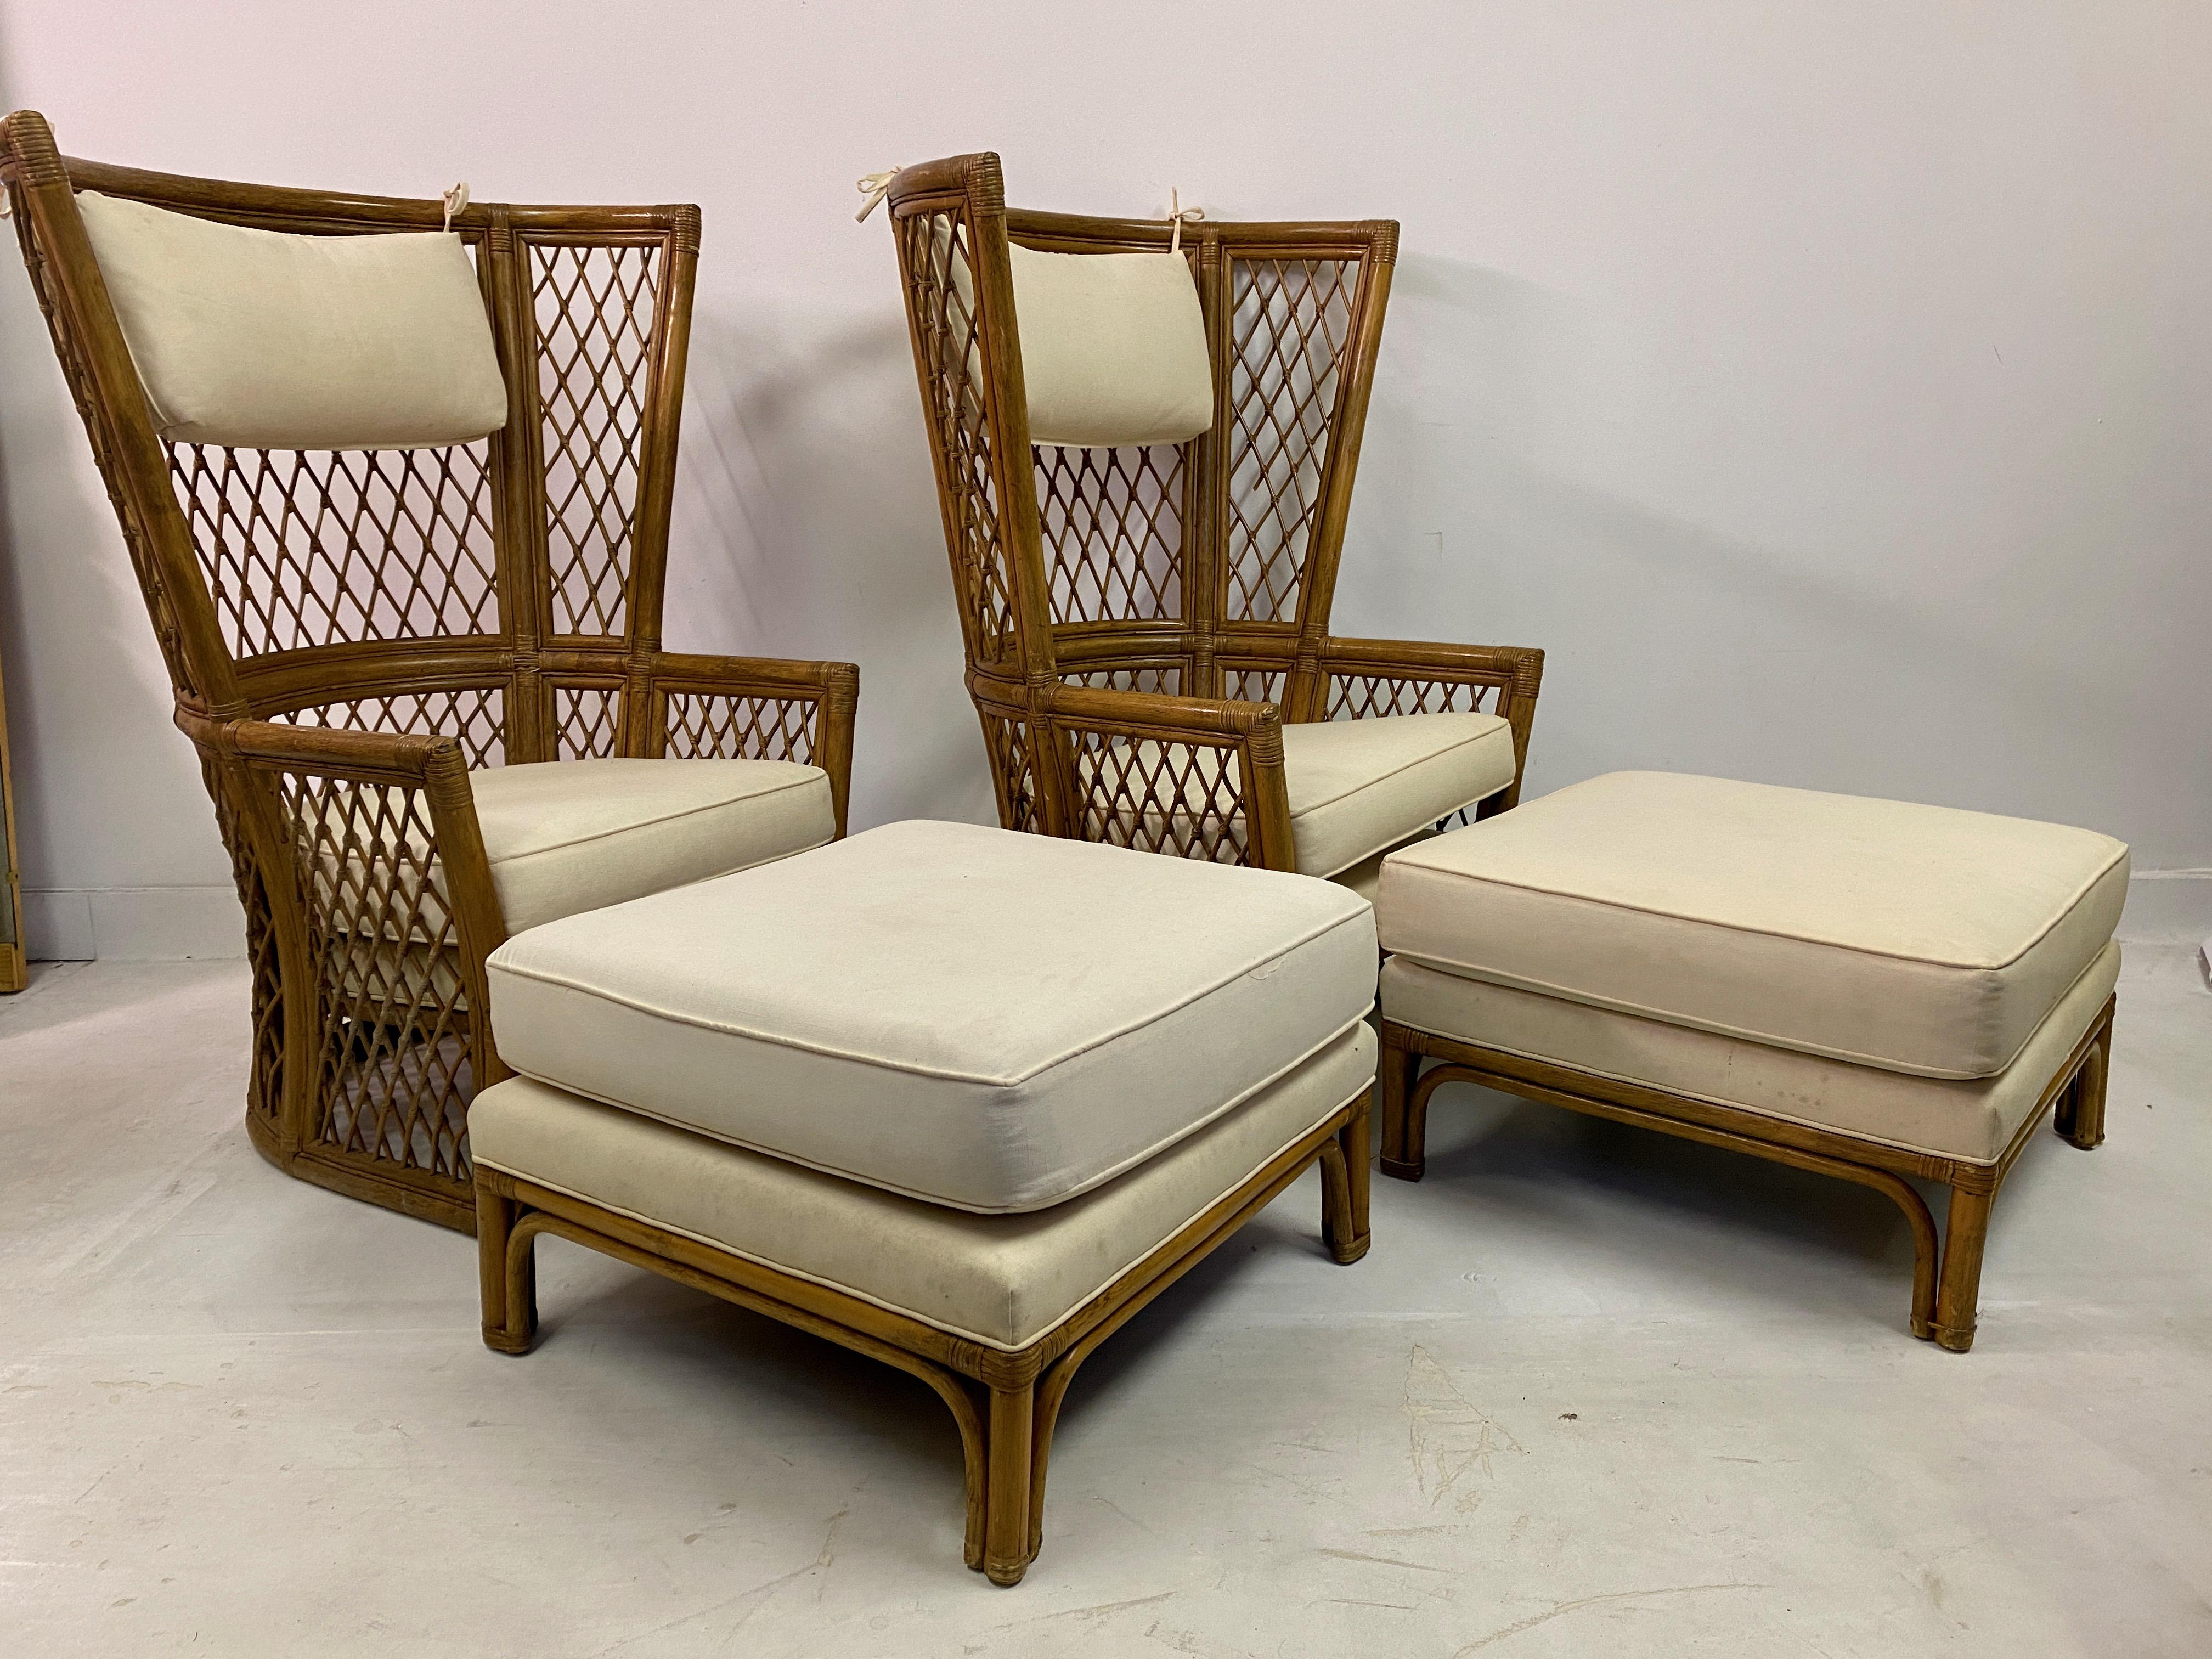 Pair of armchairs 

High back 

With matching ottomans

Lattice back

Excellent quality

Upholstery will need replacing. We can offer that service at cost price.

Seat height 45cm

Stools measure 43h x 68 x 68 cm

USA, Early 1980s